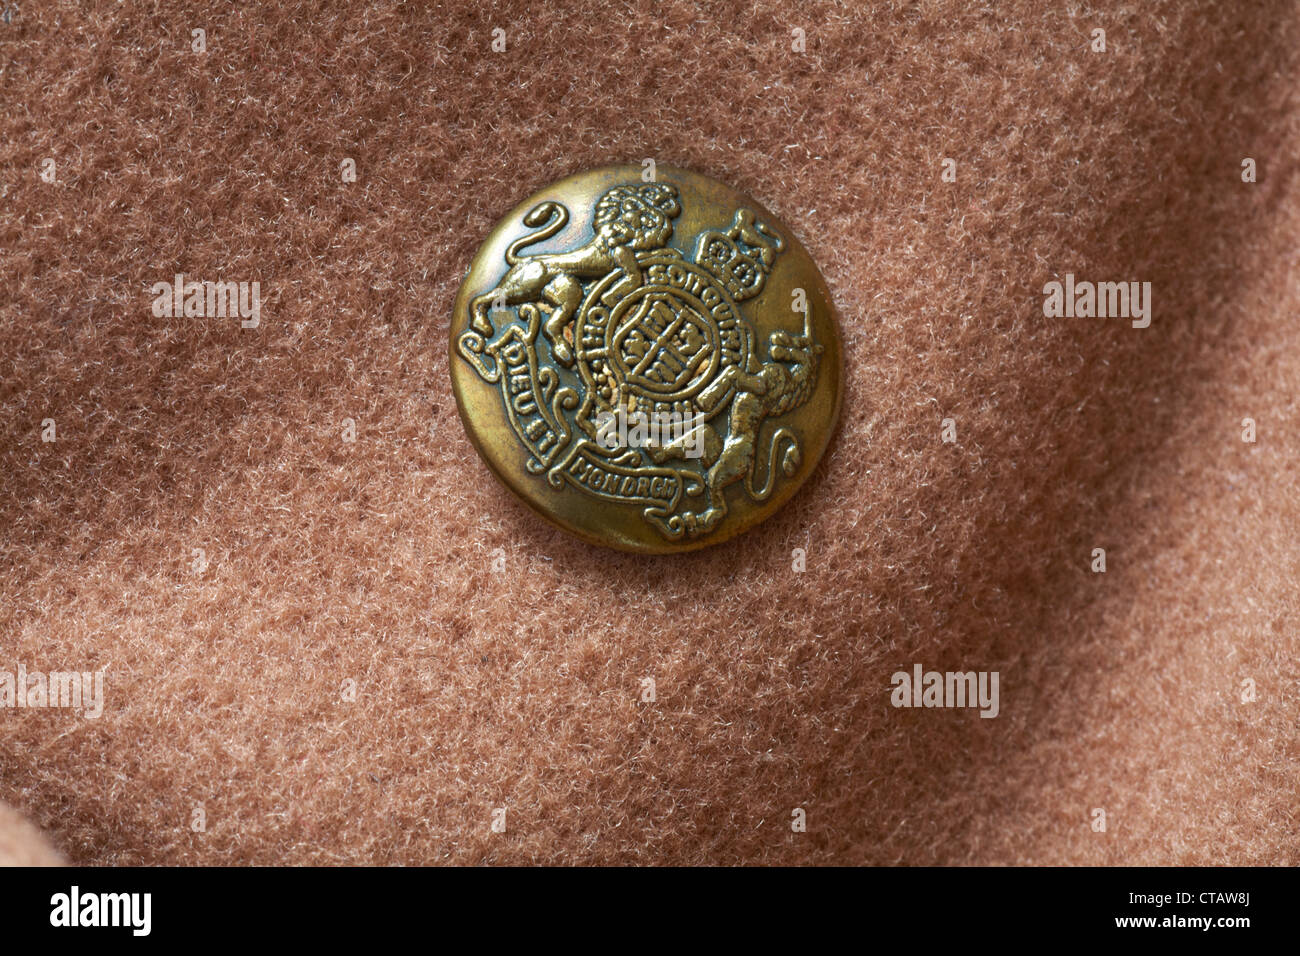 decorative gold coloured button with Dieu et mon droit motto and shield of the coat of arms of the UK on Daniel Hechter brown woolen coat Stock Photo